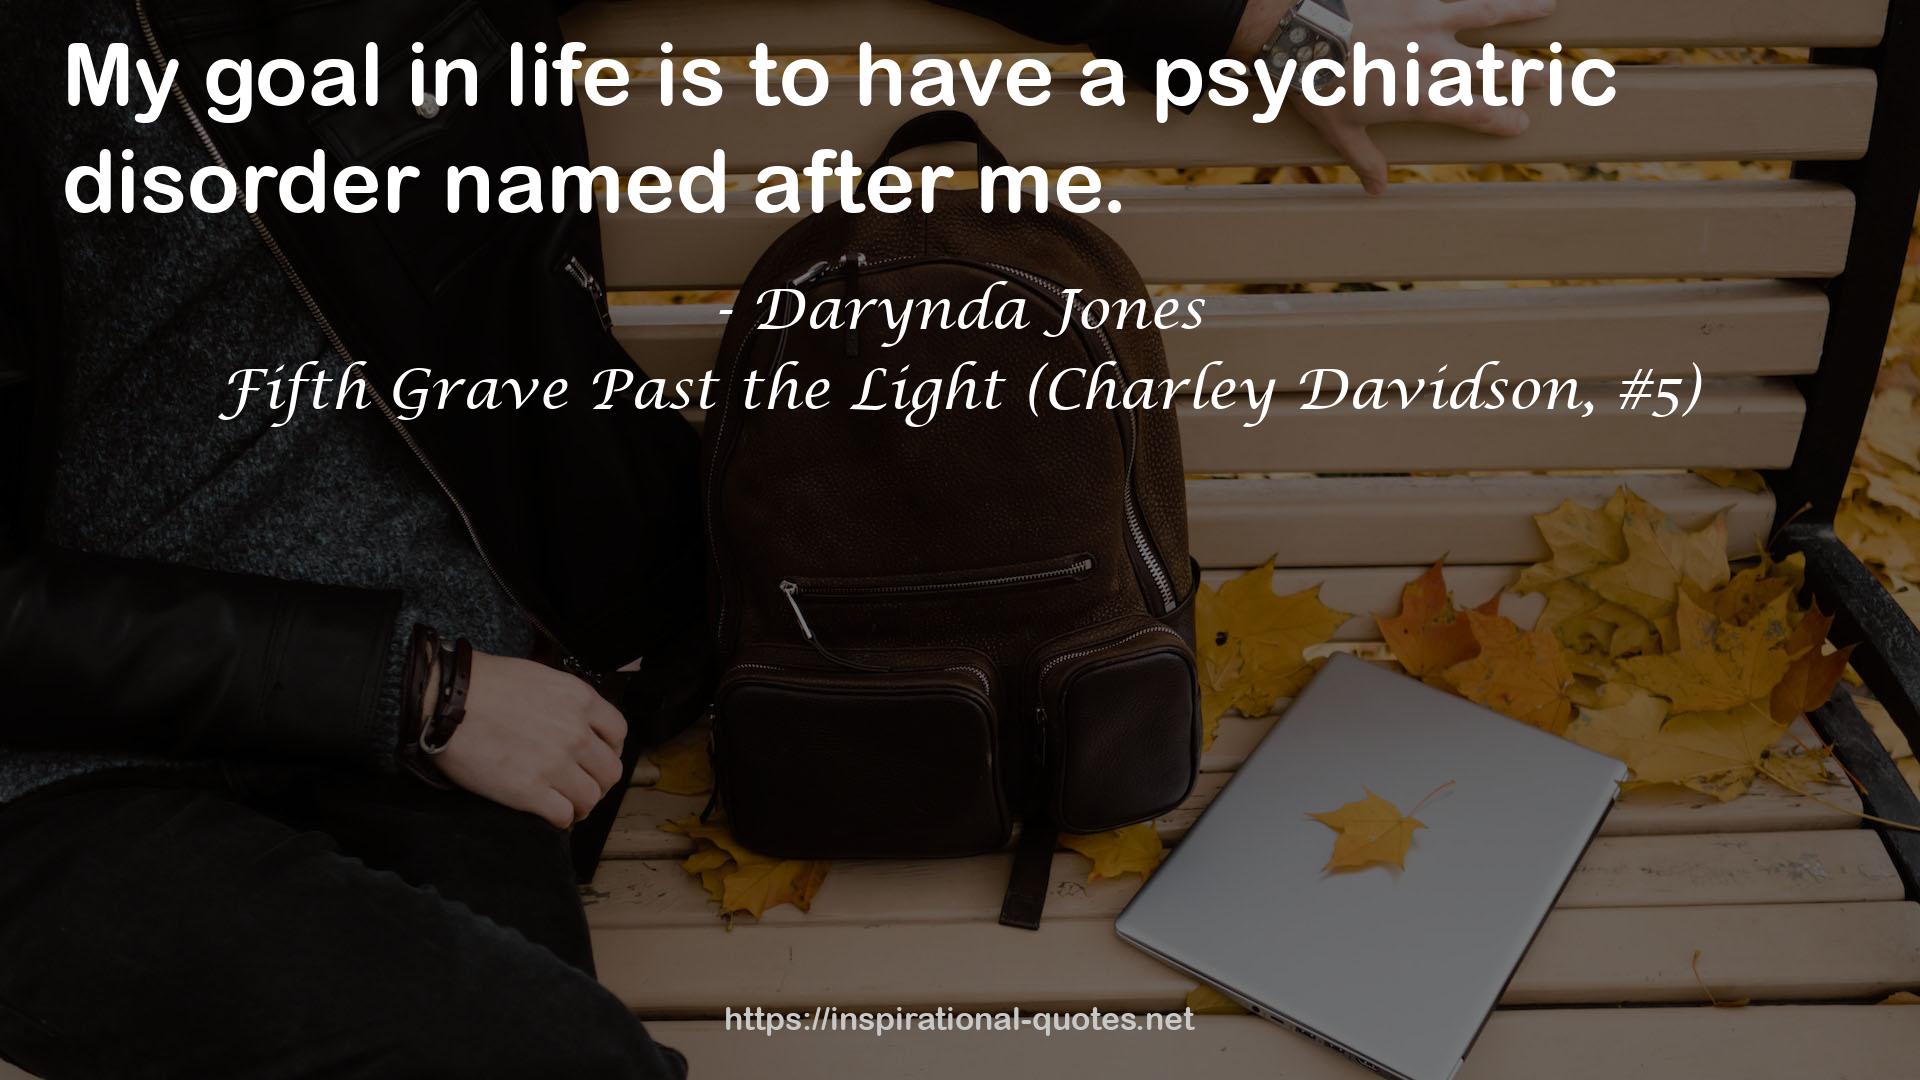 Fifth Grave Past the Light (Charley Davidson, #5) QUOTES